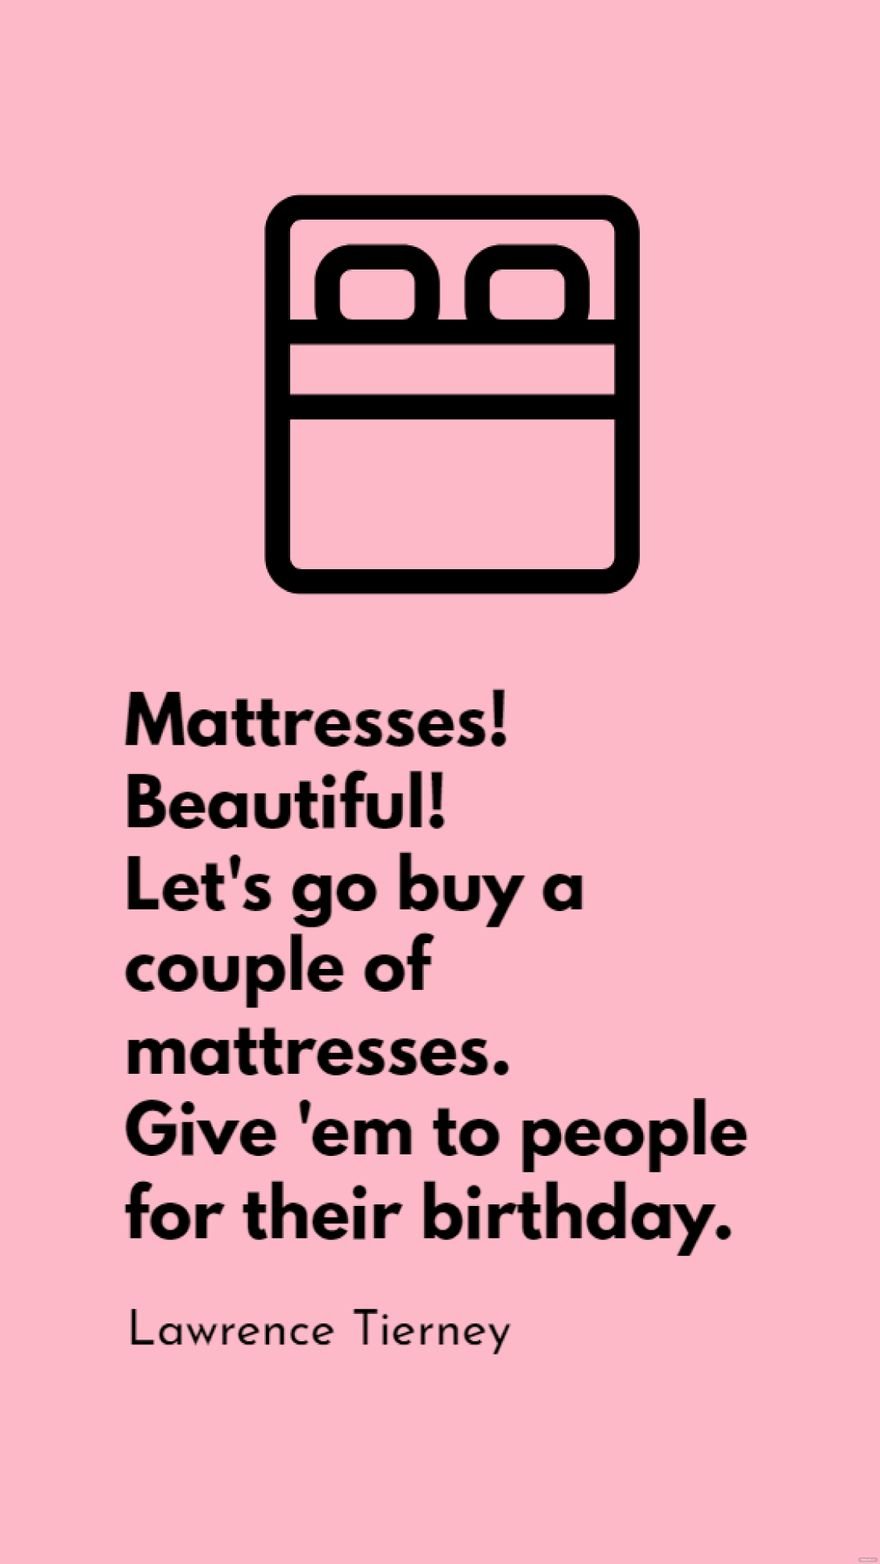 Lawrence Tierney - Mattresses! Beautiful! Let's go buy a couple of mattresses. Give 'em to people for their birthday.